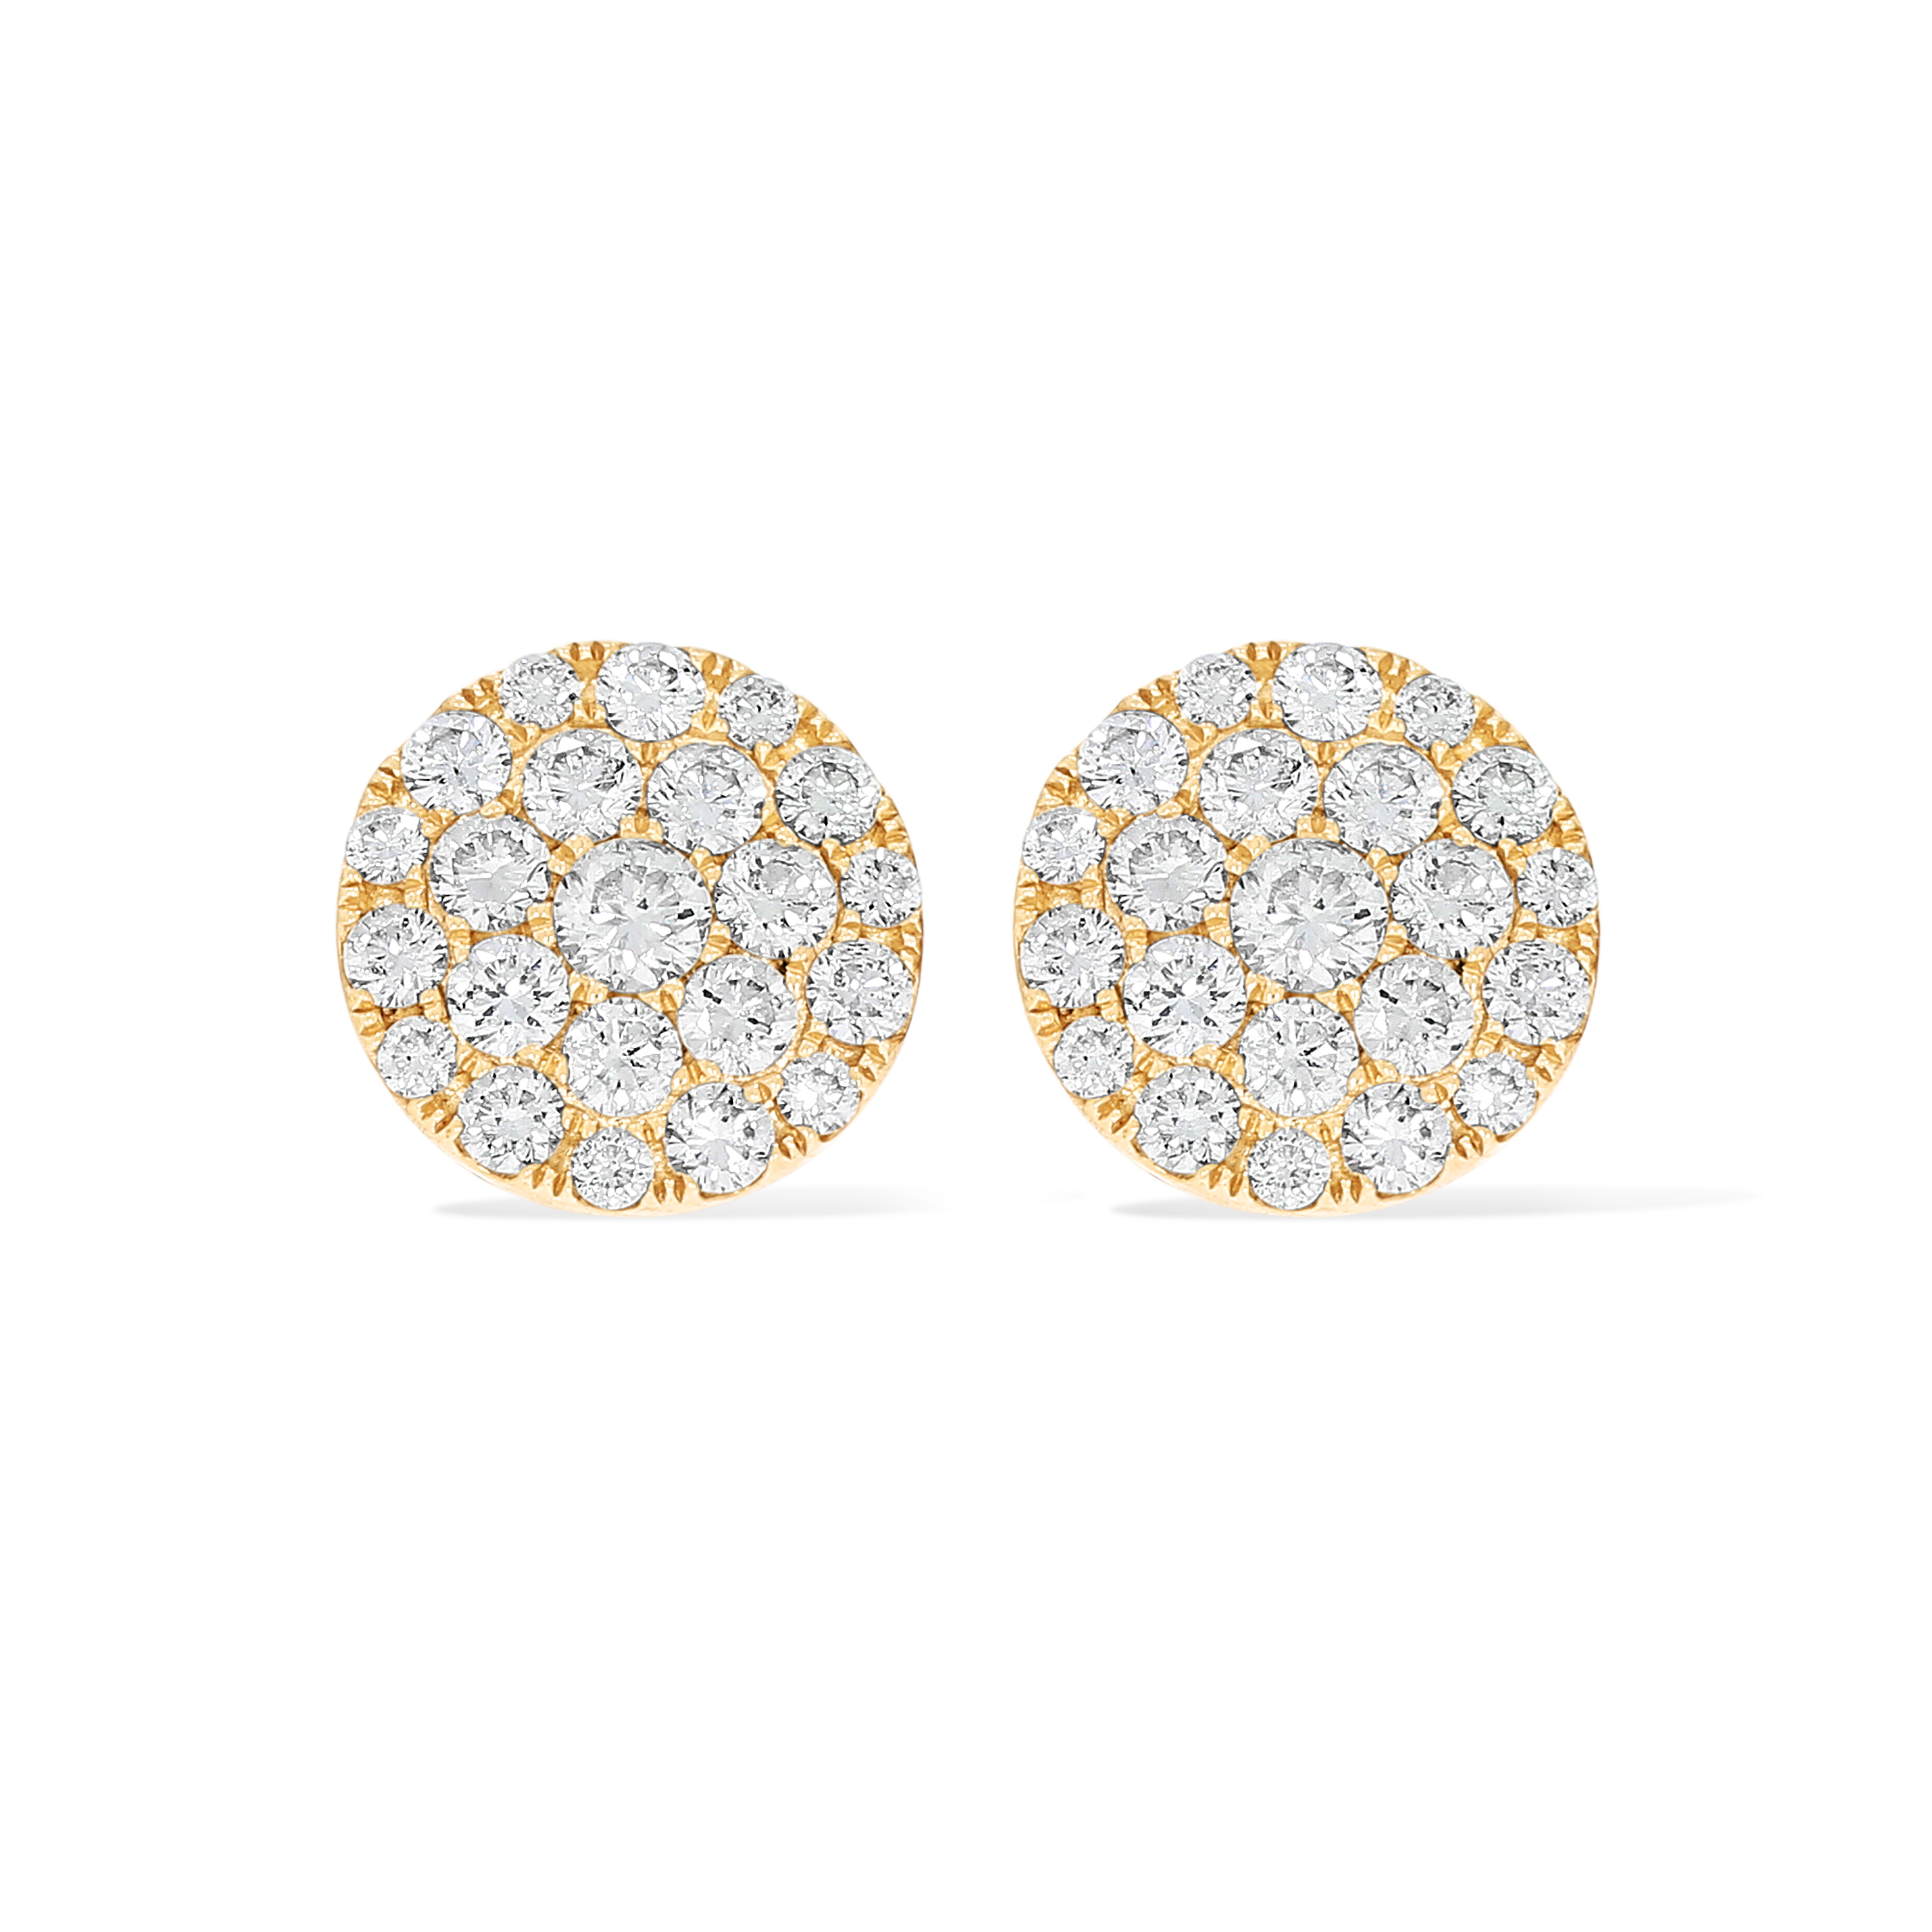 Diamond Cluster Round Earrings 1.14 ct. 14k Yellow Gold